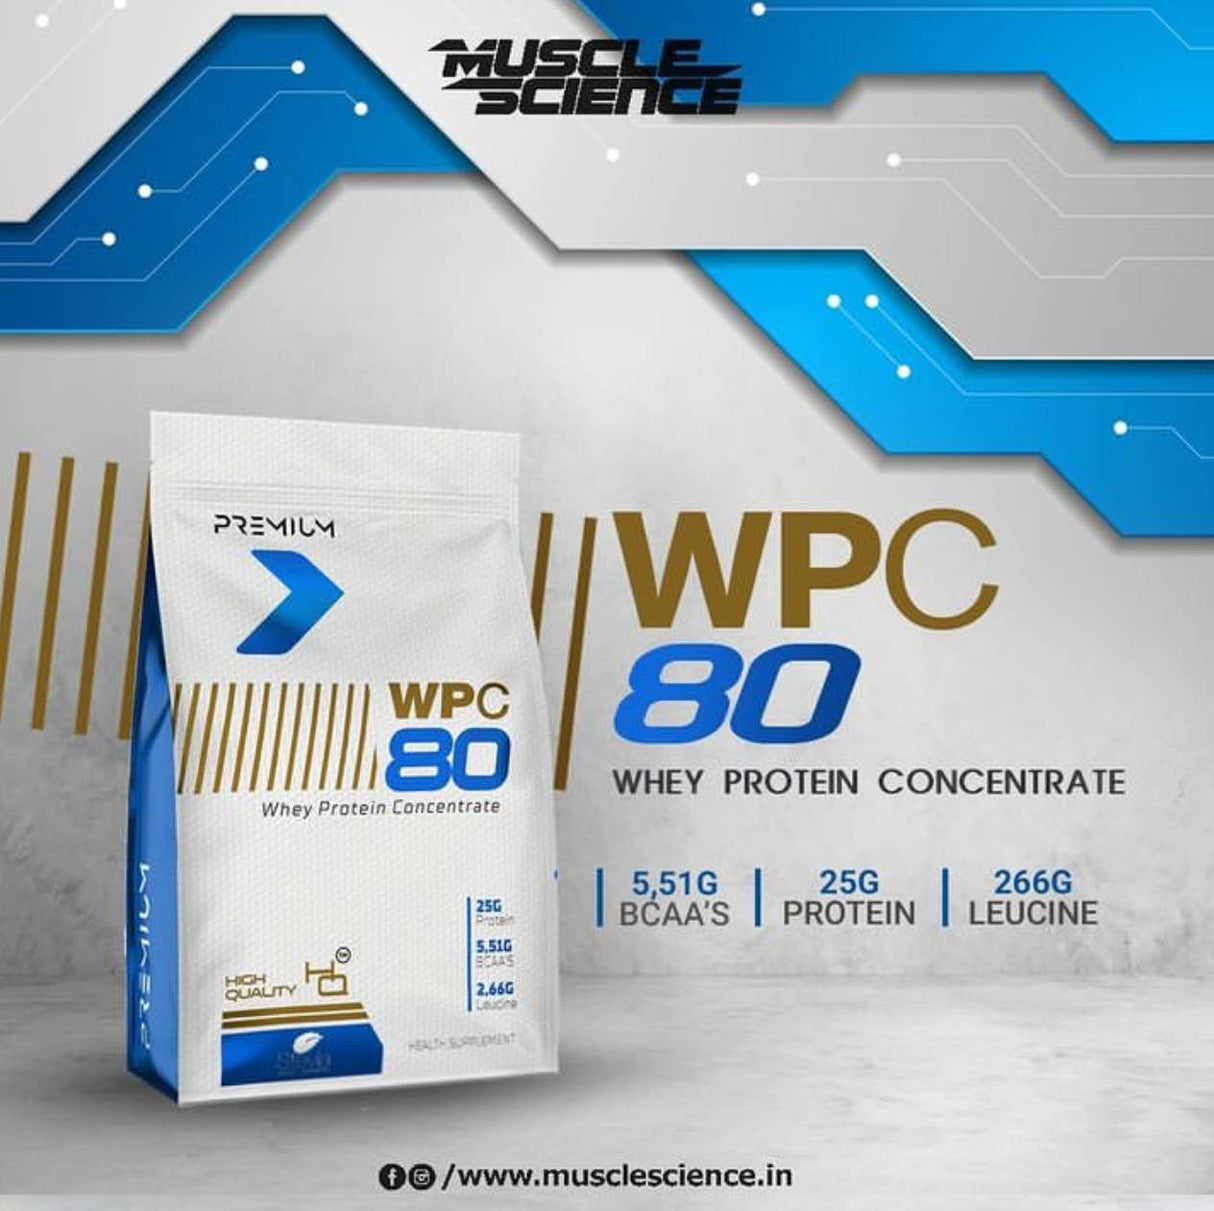 Muscle Science Premium Whey WPC